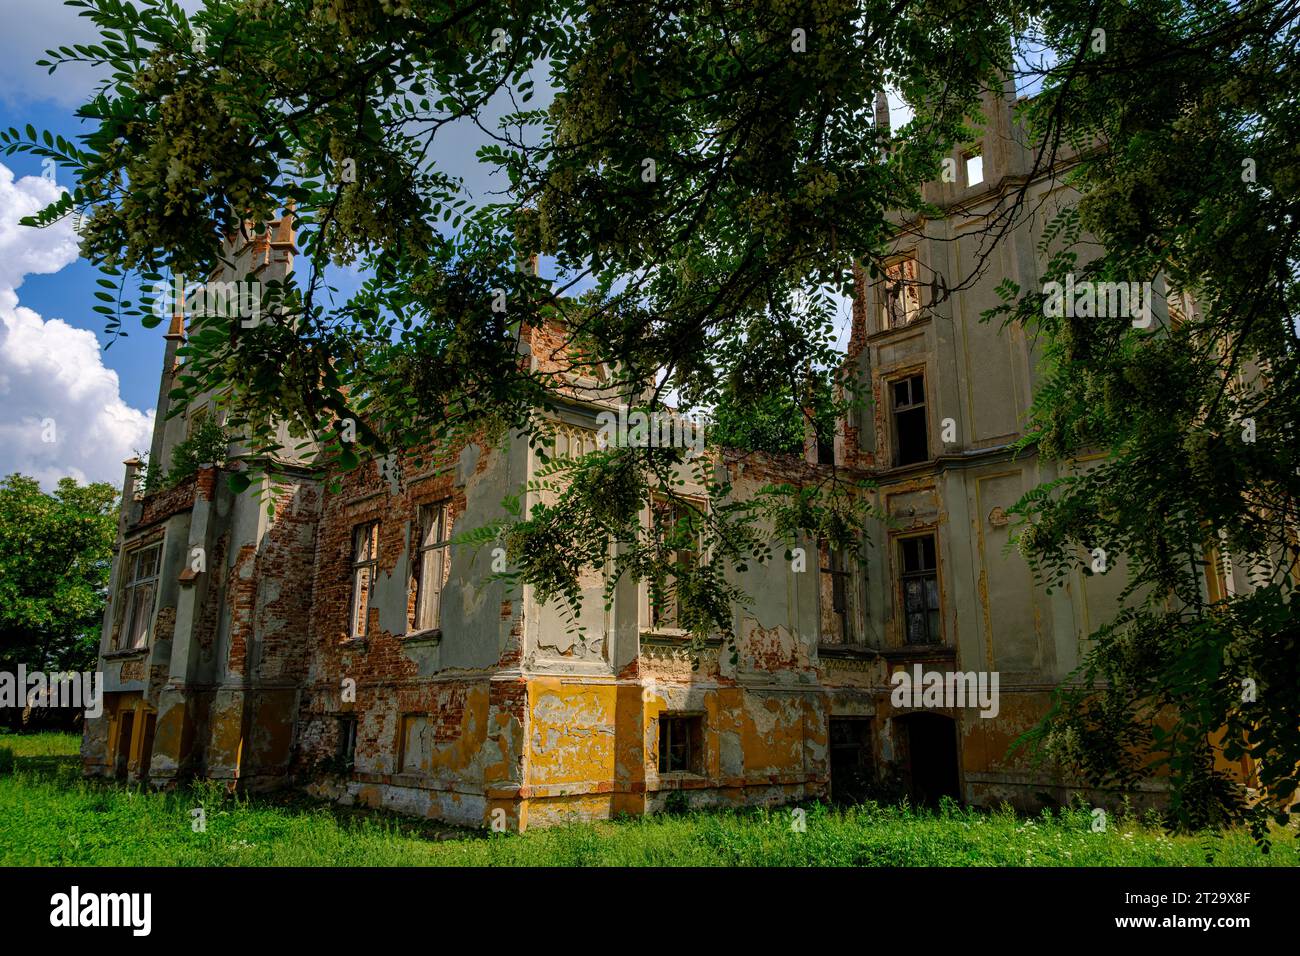 The ruin of Rosen Manor, a neo-Gothic edifice from the second half of the 19th century, in Roznow (Rosen), Opole voivodeship, Poland. Stock Photo